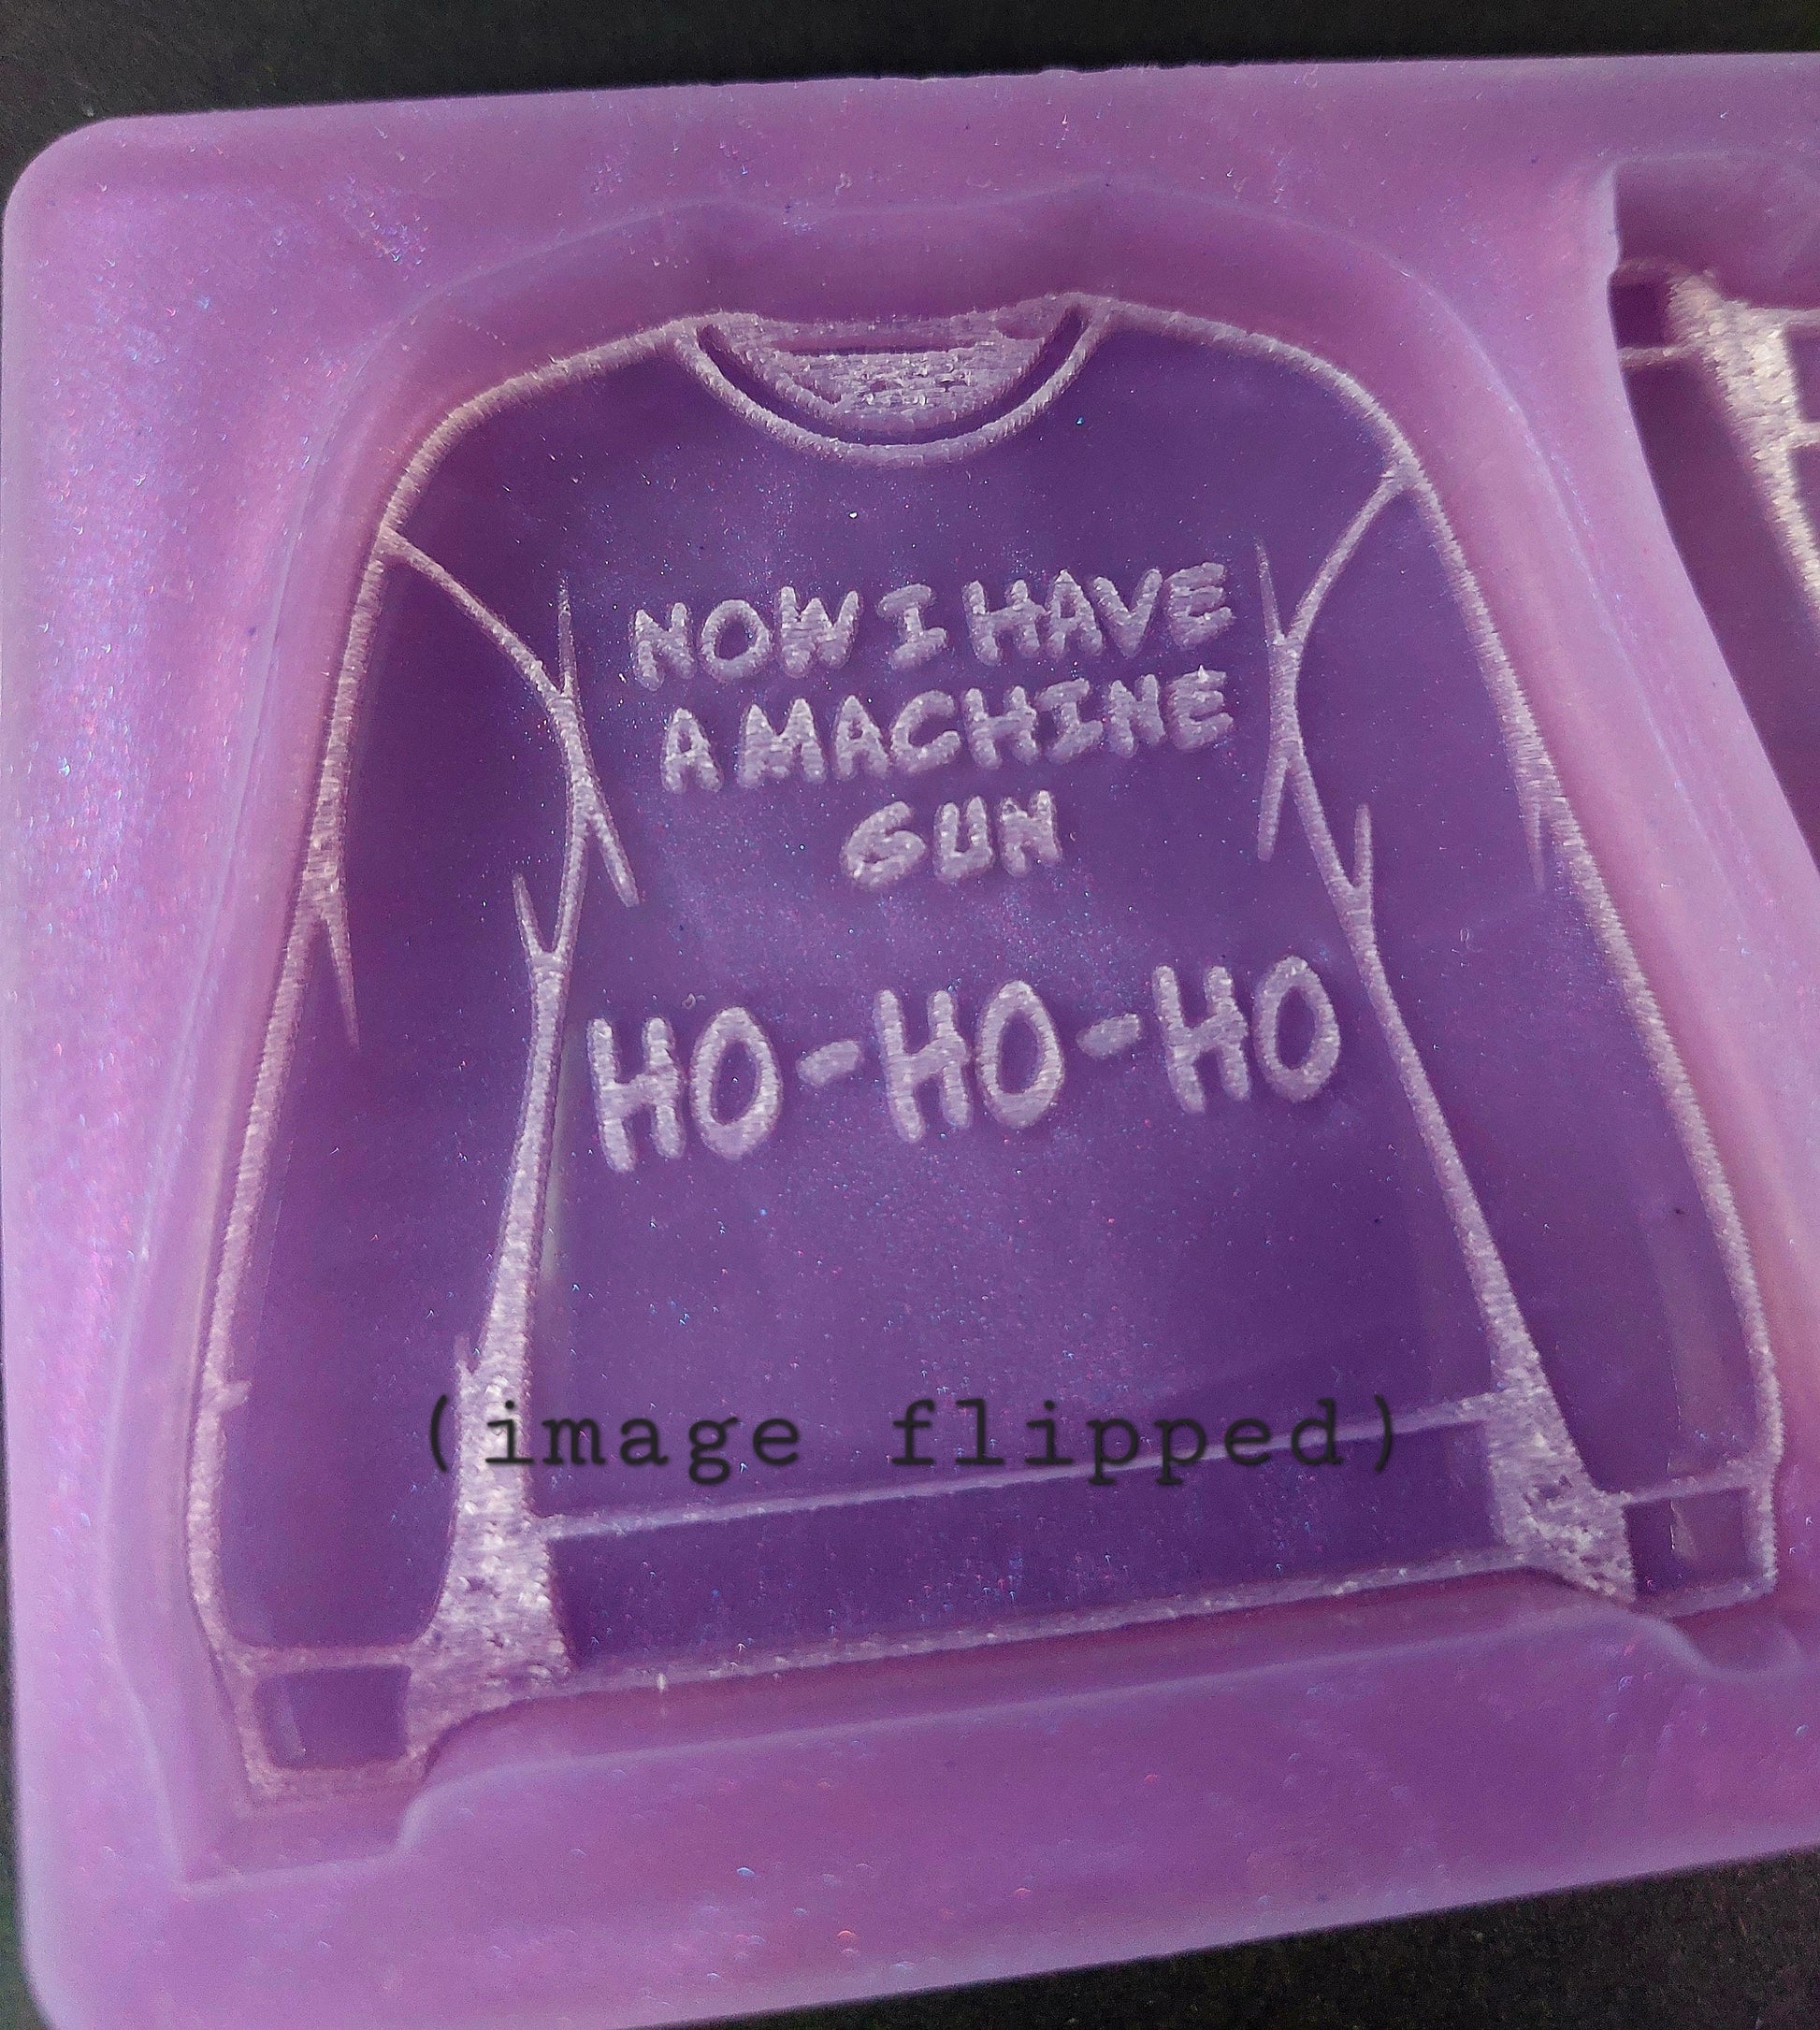 Ho ho ho Jumper Silicone Mould for wax melts, resin and more